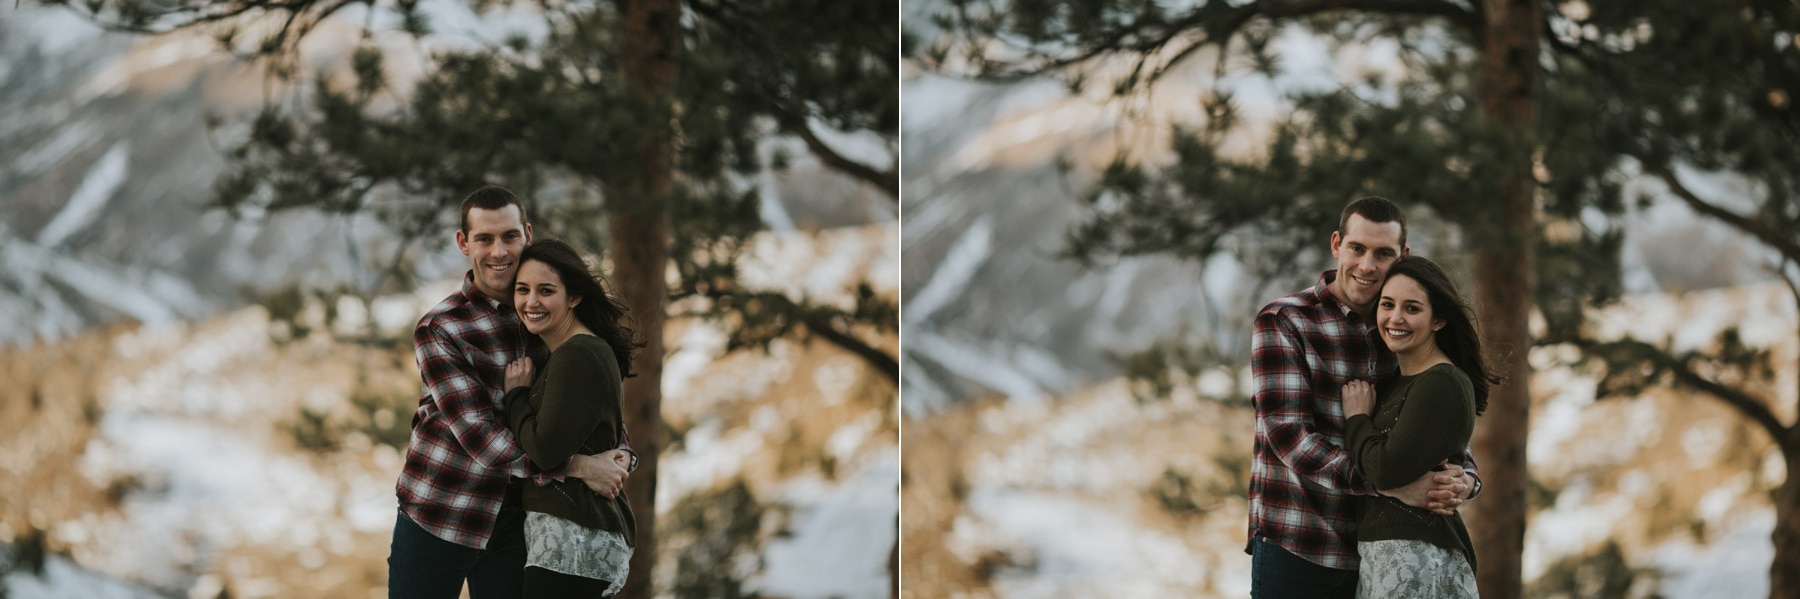  candid engagement photos, diamond engagement ring, engageed engineers, golden engagement photographer, golden engagement photography, golden winter engagement, laughter during engagement session, lookout mountain engagement, round engagement ring, texans in colorado, winter engagement